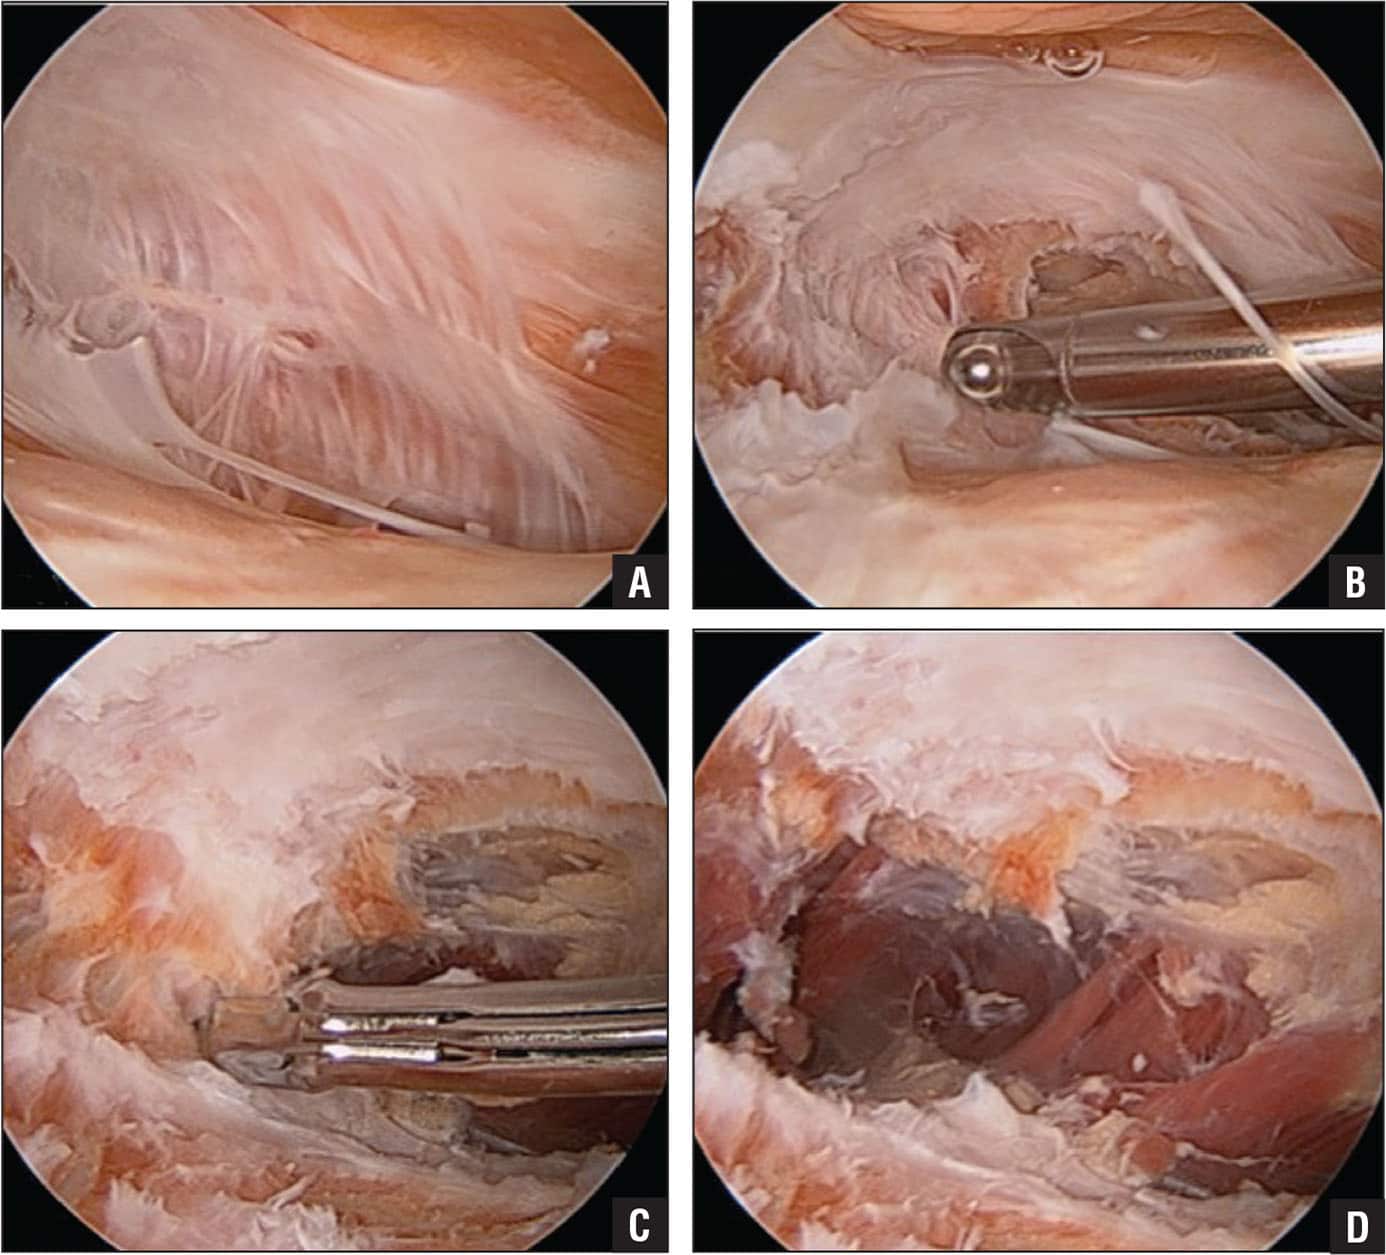 Nonligamentous Soft Tissue Pathology About the Knee: A Review